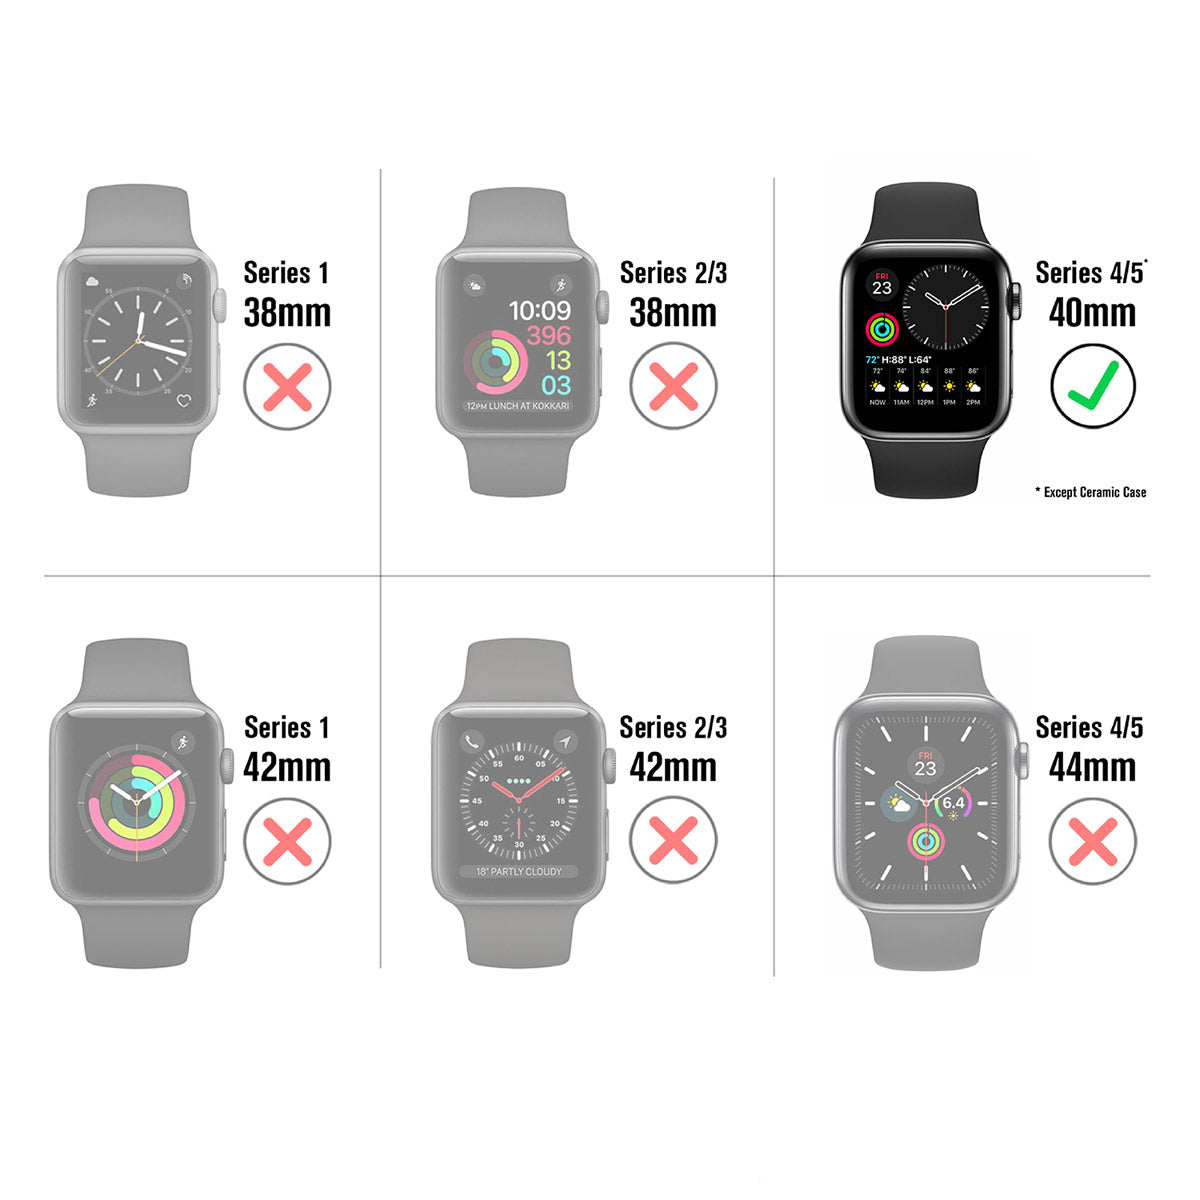 catalyst apple watch series 6 5 4 se gen 21 44mm 40mm impact protection case sport band different sizes of apple watch text reads series 1 38mm series 2/3 38mm series 4/5 40mm series 1 42mm series 2/3 42mm series 4/5 44mm except ceramic case